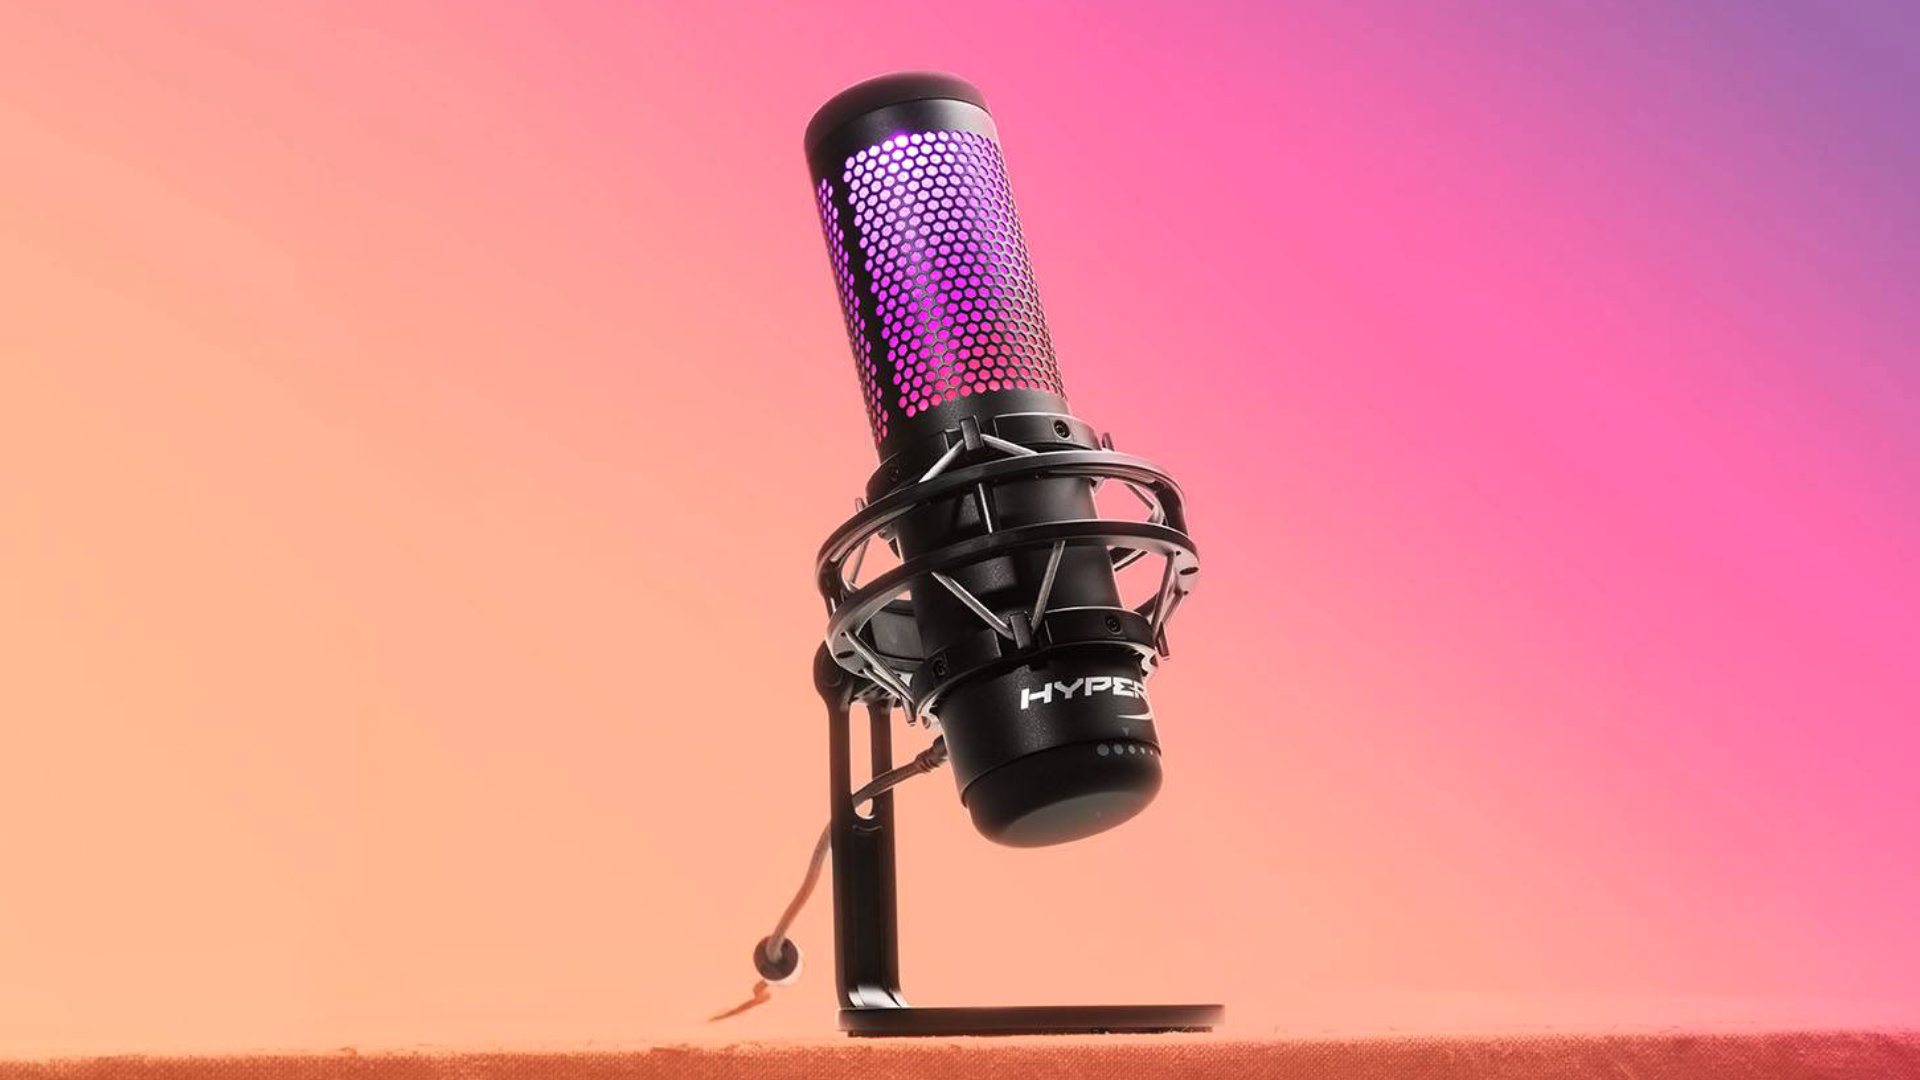 The Best Gaming Microphones For 2024